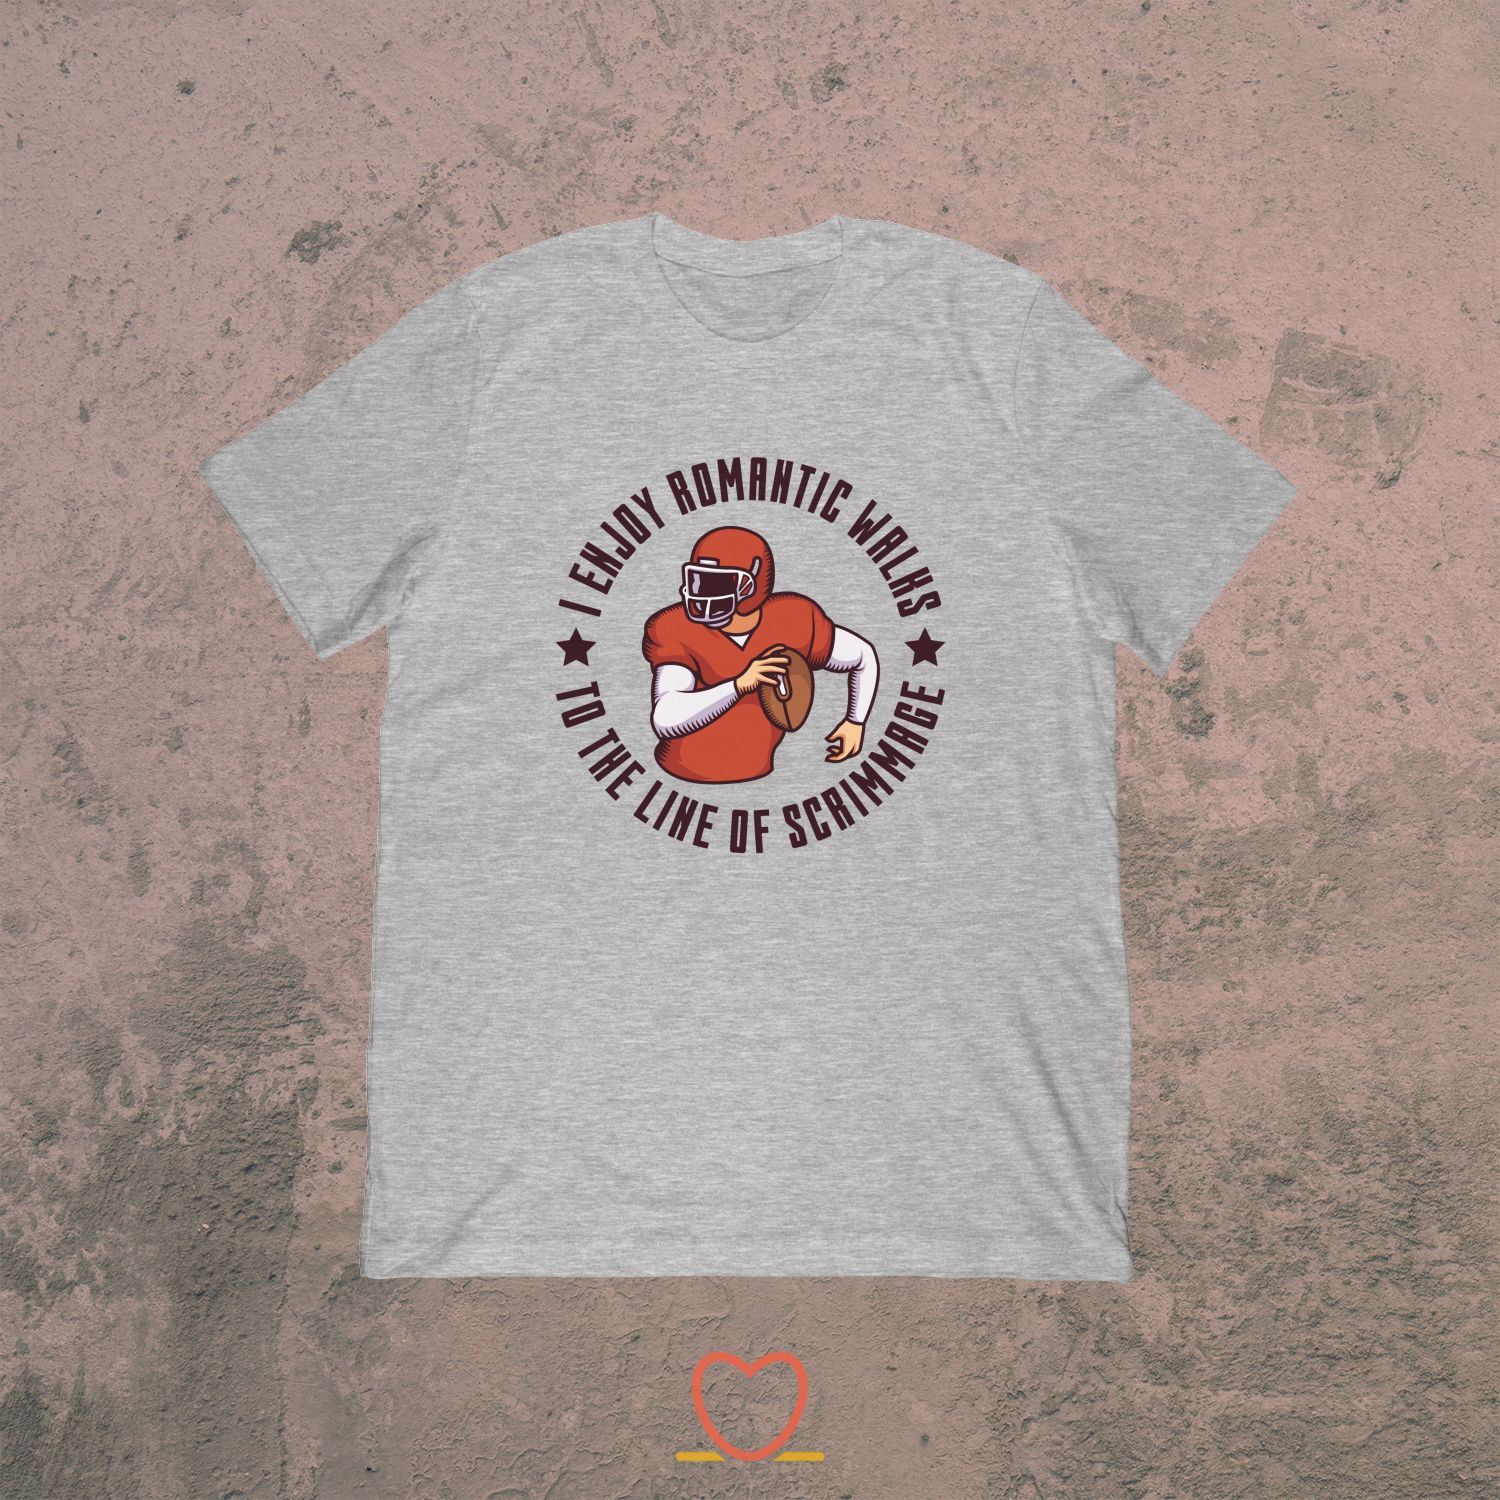 Romantic Walks To The Line Of Scrimmage – Funny US Football Tee